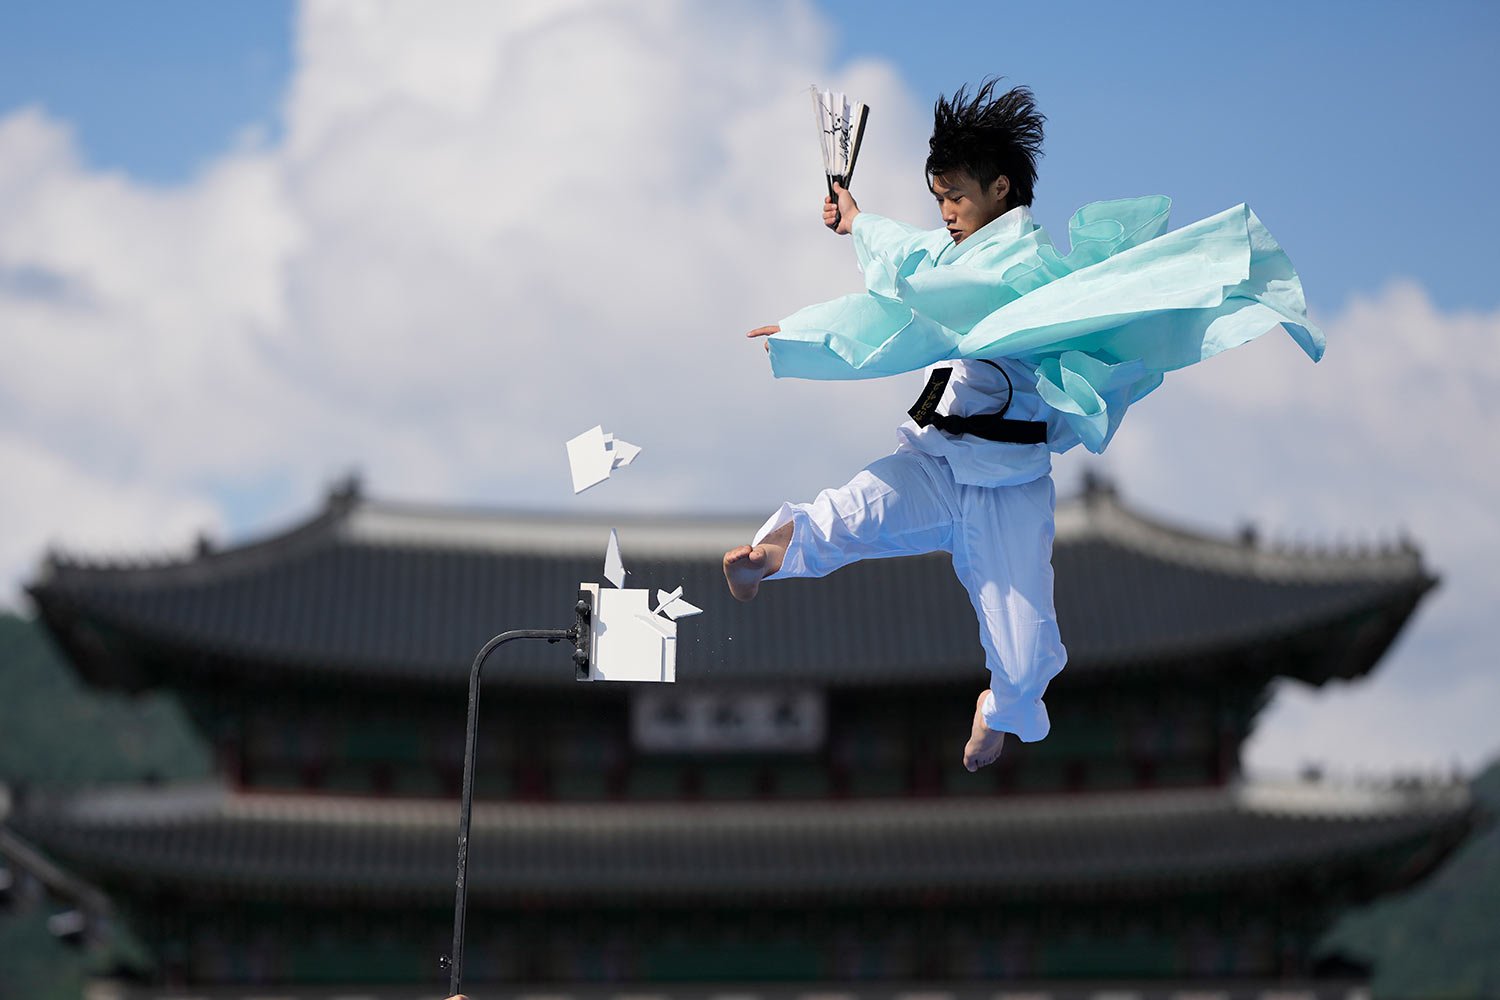  A member of Taekwondo demonstration team breaks plates during the Taekwondo demonstration near the Gwanghwamun, one of South Korea's well-known landmarks, at a square in downtown Seoul, South Korea, Friday, Oct. 7, 2022. (AP Photo/Lee Jin-man) 